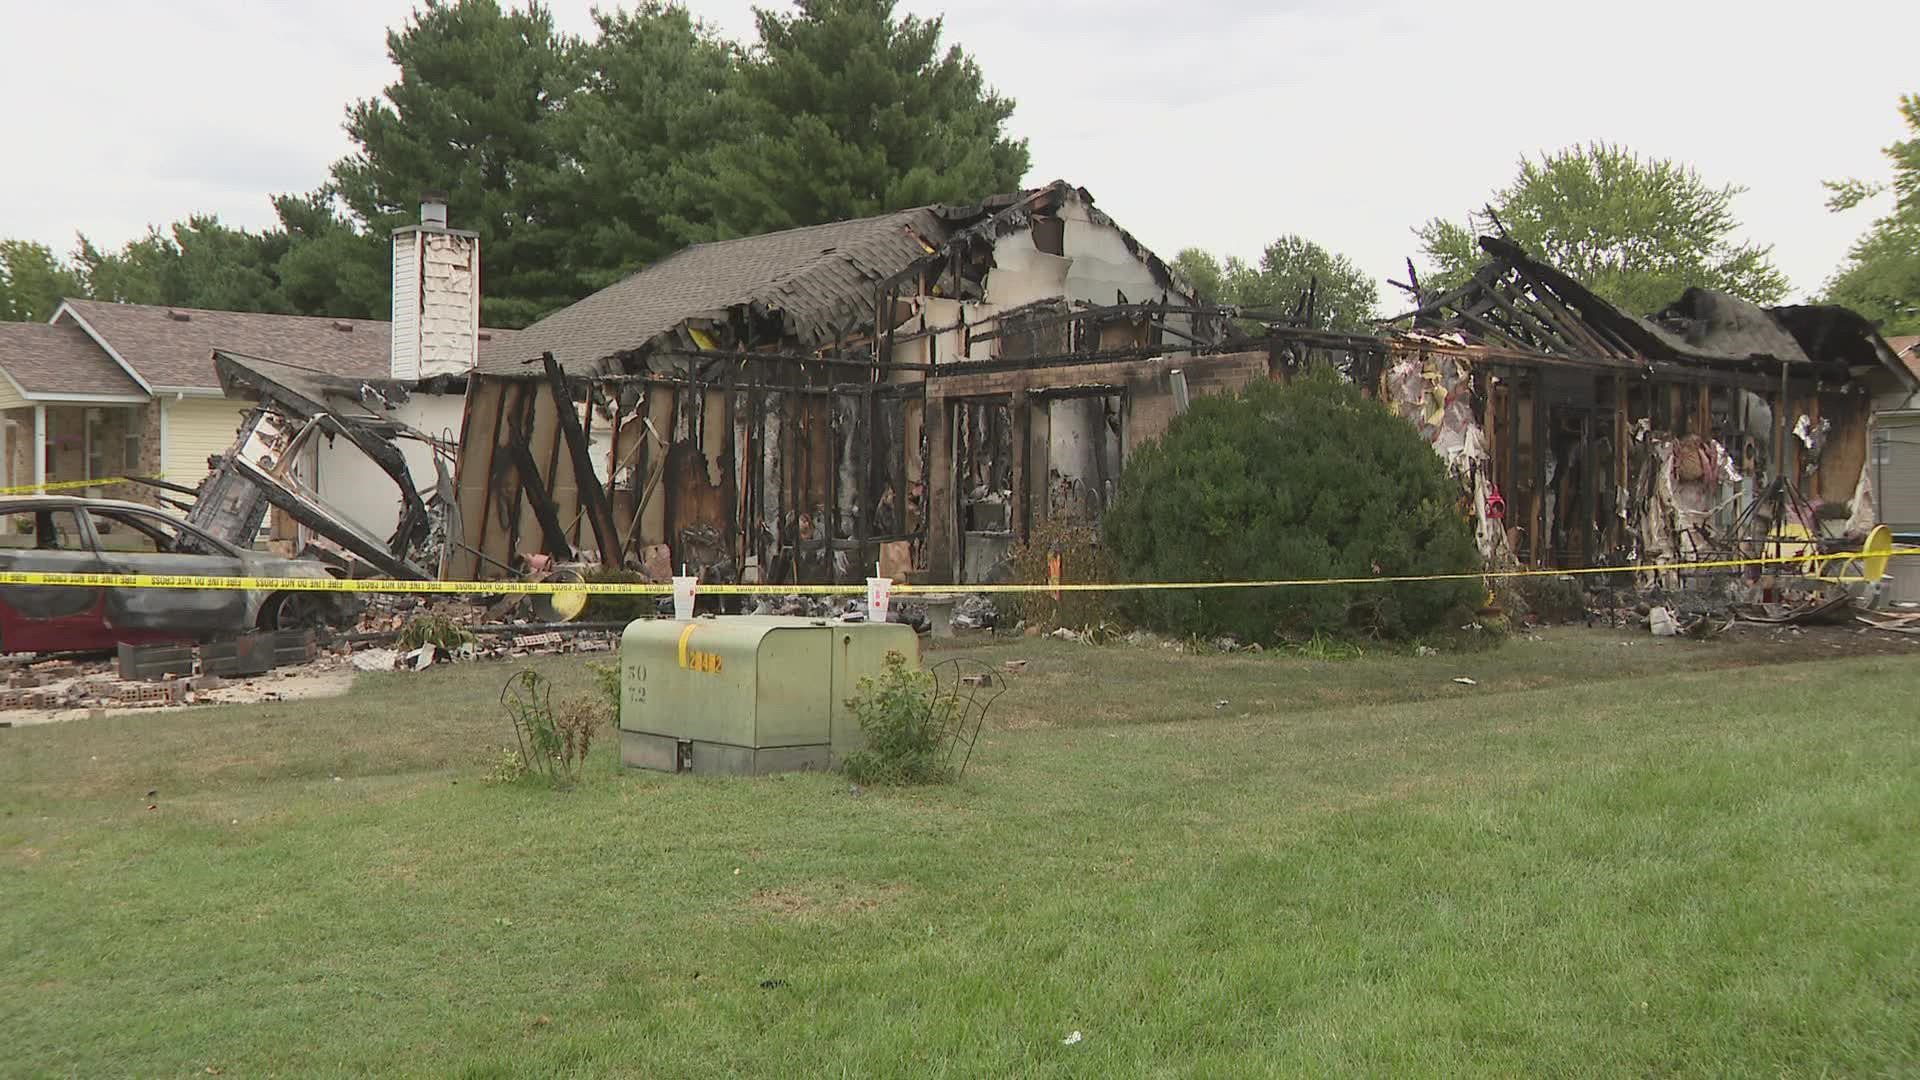 After firefighters put out the fire, they found 69-year-old Susanne Tomlinson dead inside.